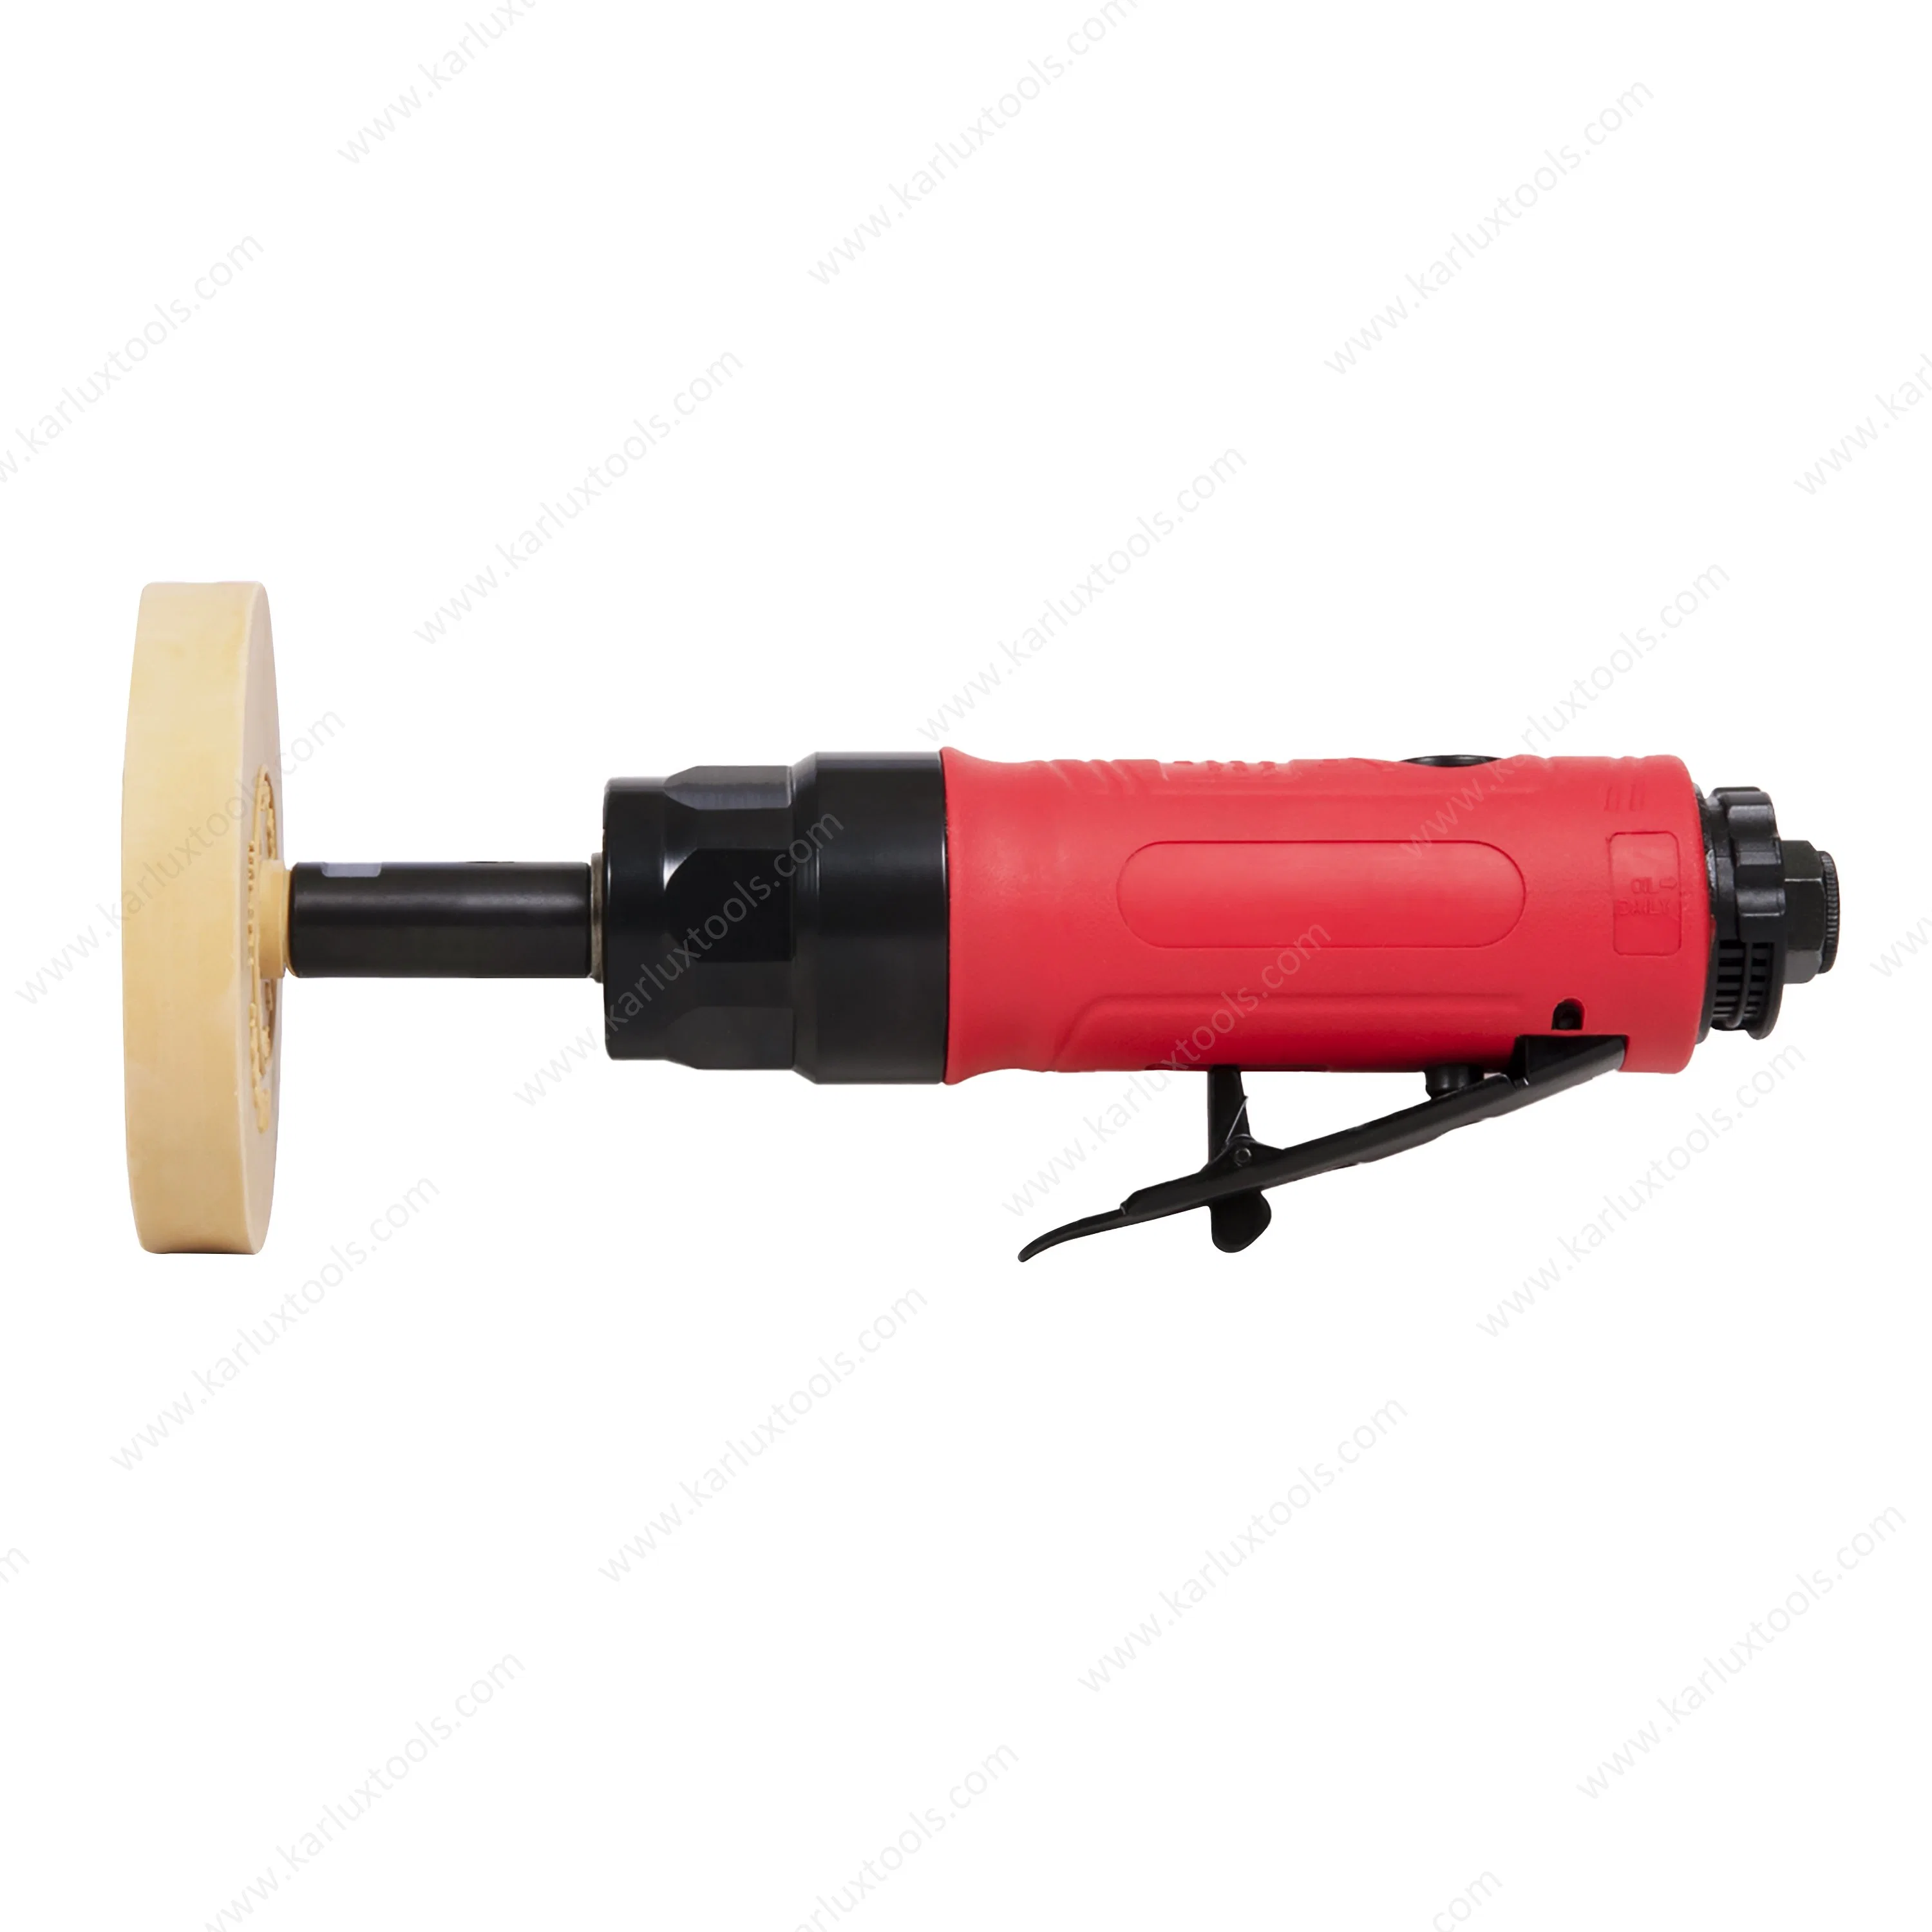 4000rpm 88mm Glue Cleaning Tool Pneumatic Air Eraser Decal Adhesive Remover Tool Air Glue Remover